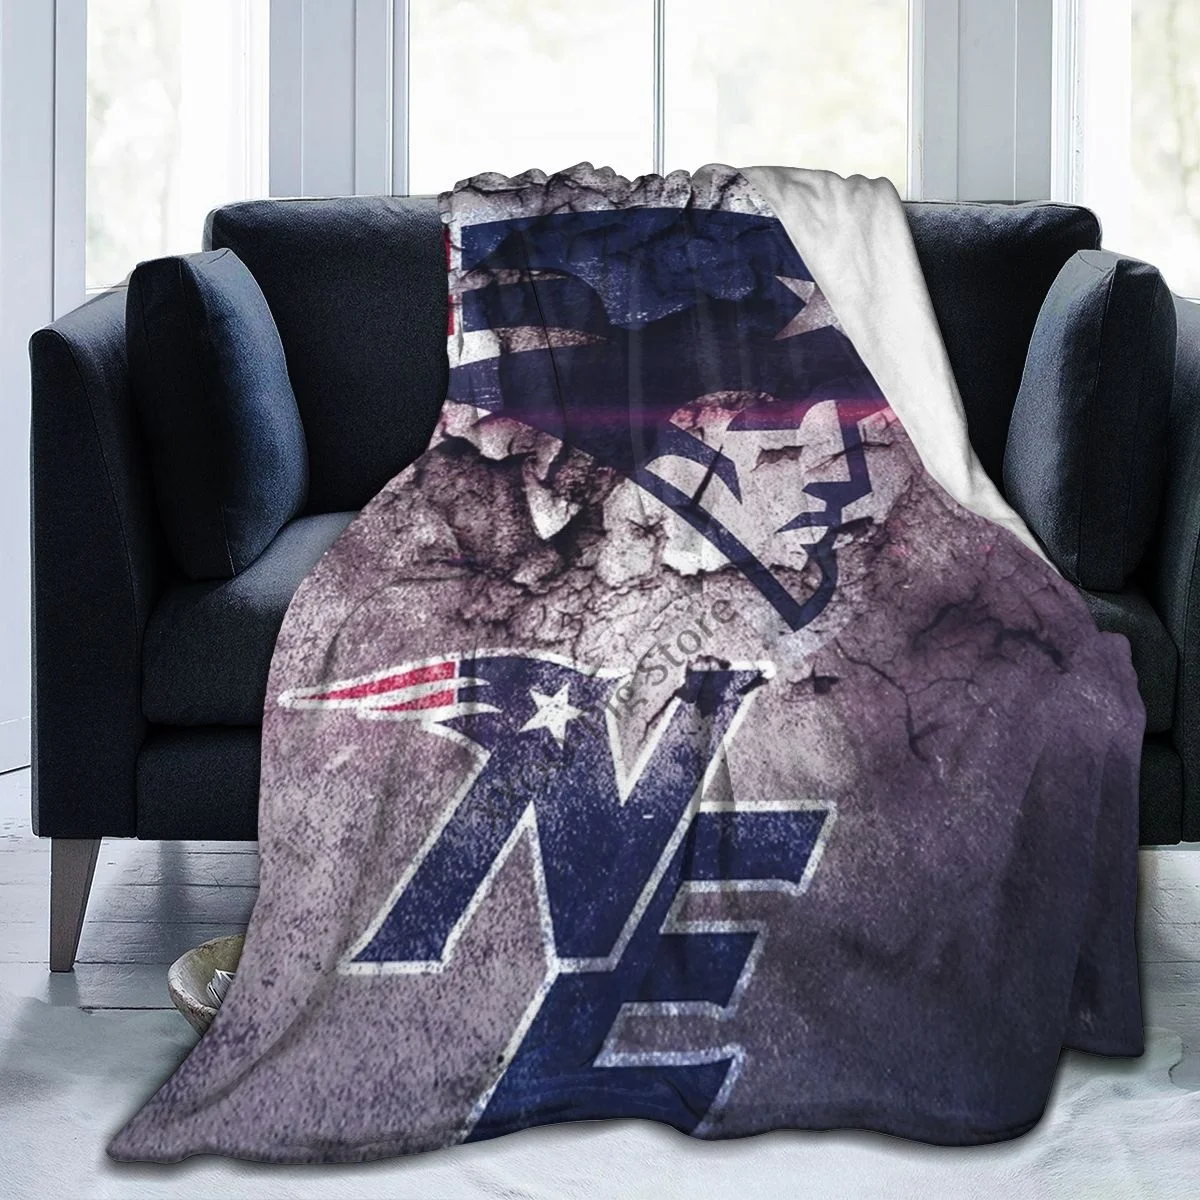 

New England Patriots Throw Blanket Fuzzy Warm Throws for Winter Bedding 3D Printing Soft Micro Fleece Blanket